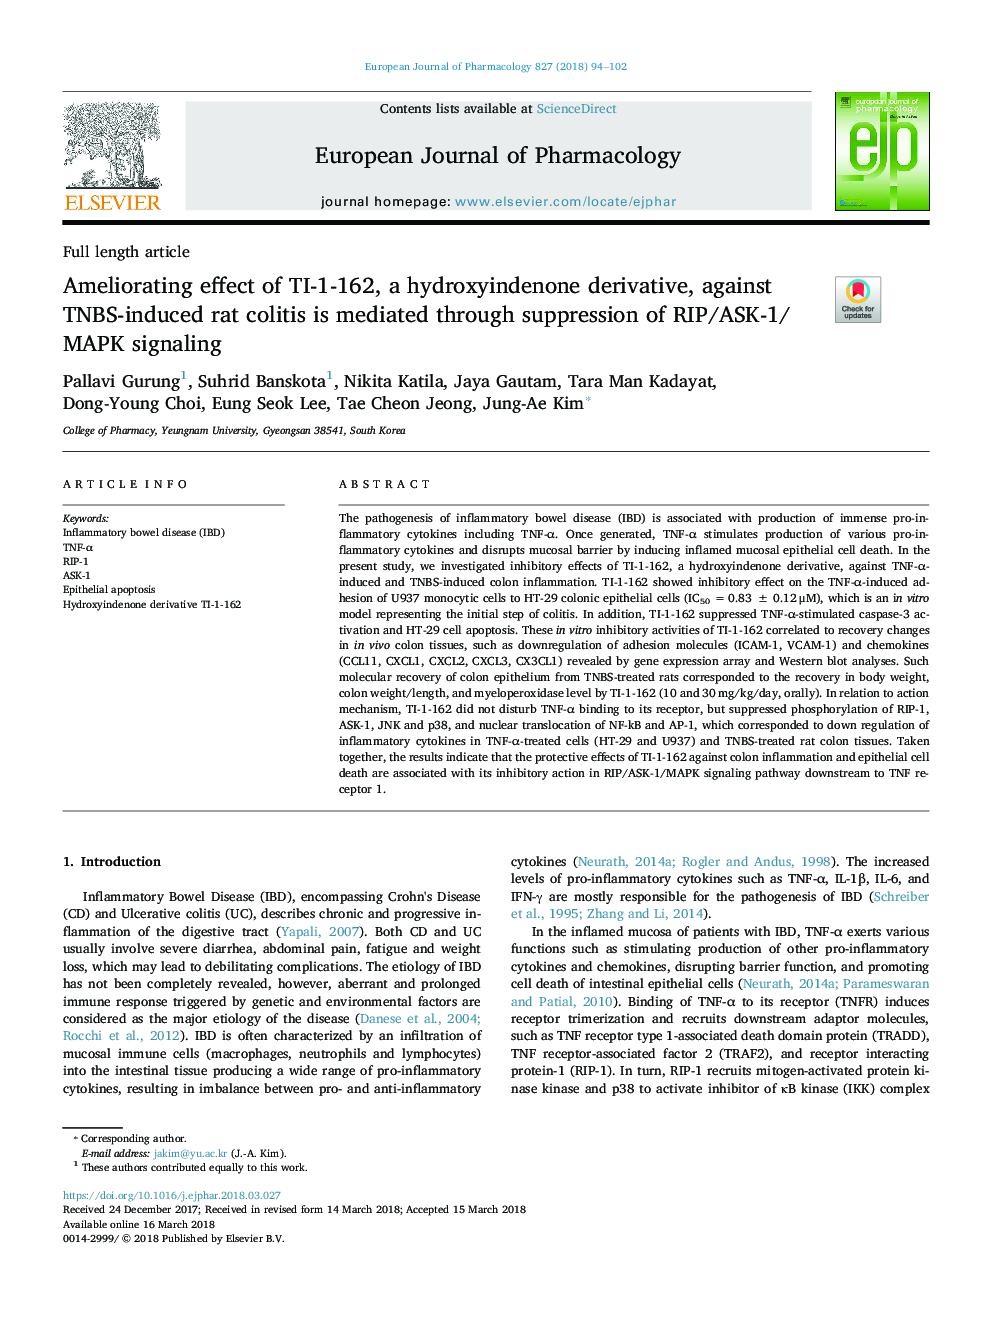 Ameliorating effect of TI-1-162, a hydroxyindenone derivative, against TNBS-induced rat colitis is mediated through suppression of RIP/ASK-1/MAPK signaling